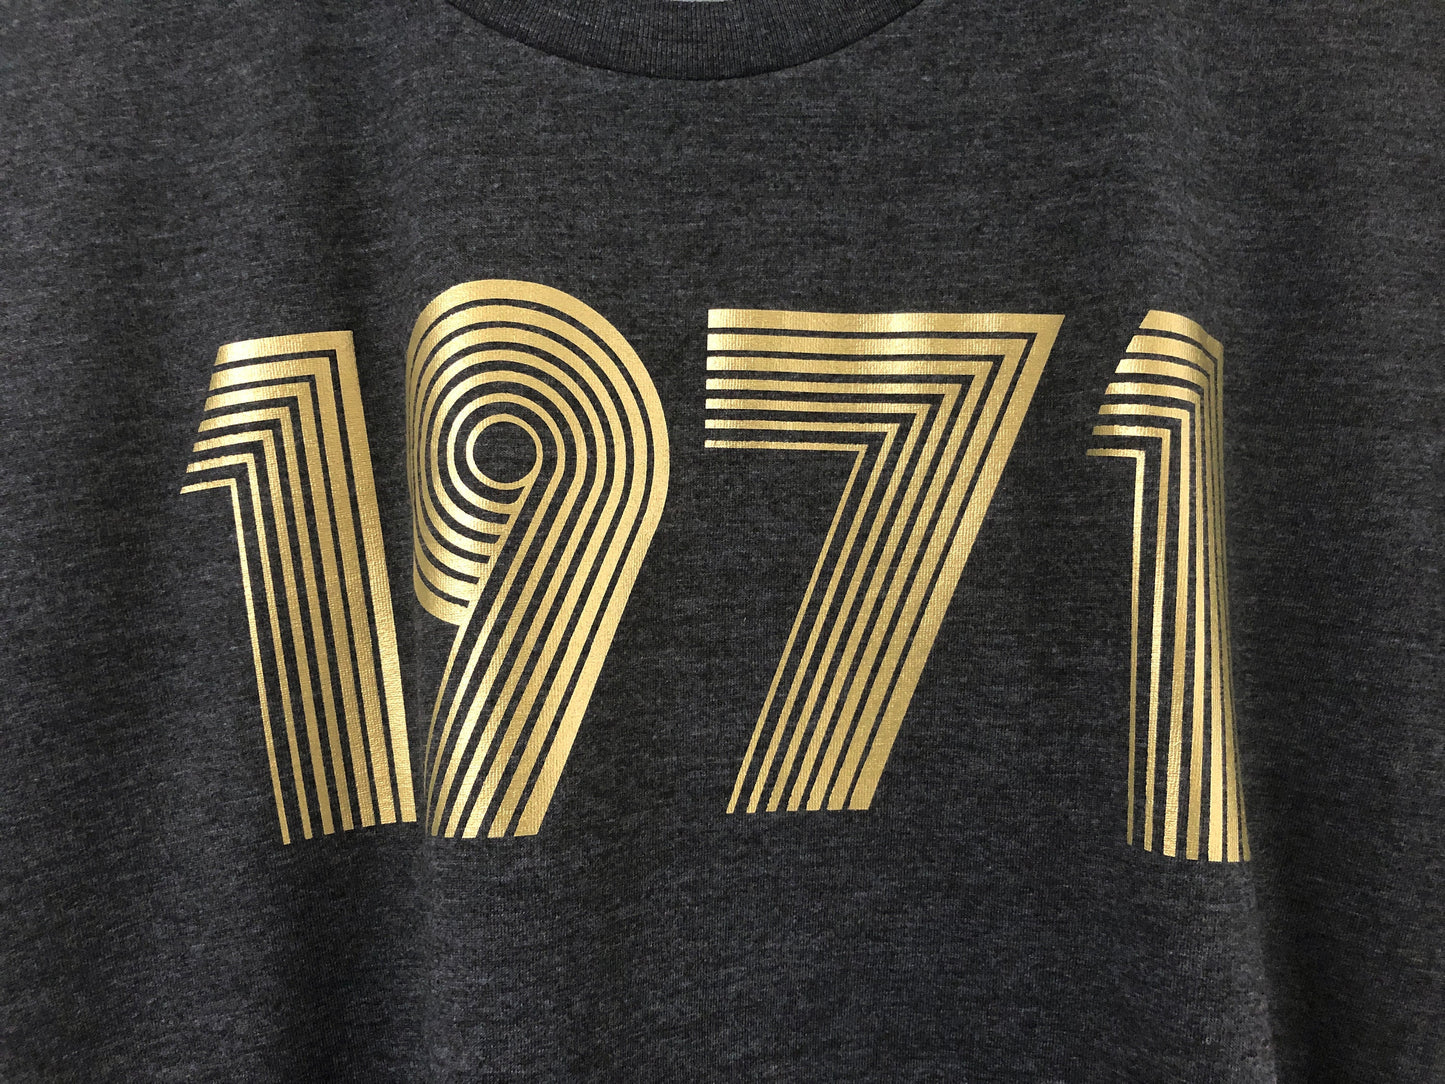 1971 Womens T Shirt Metallic Gold or Silver Foil, 51st Birthday Gift Fitted T Shirt in Retro & Vintage 70s style, Fiftieth Ladies Top